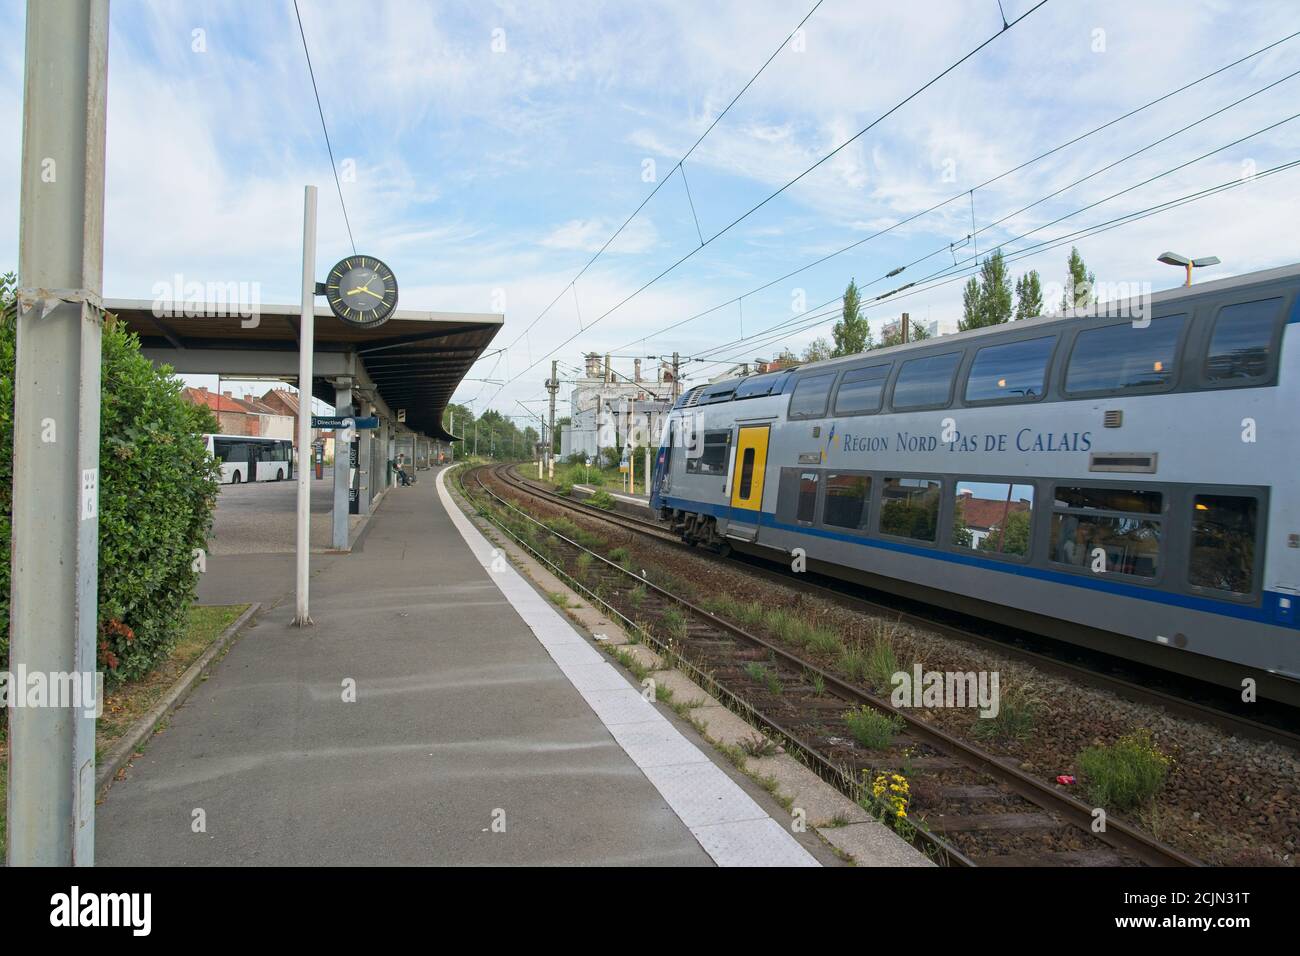 Orchies France - 3 August 2020 - Railway station of Orchies on line from Lille to Valenciennes in France Stock Photo